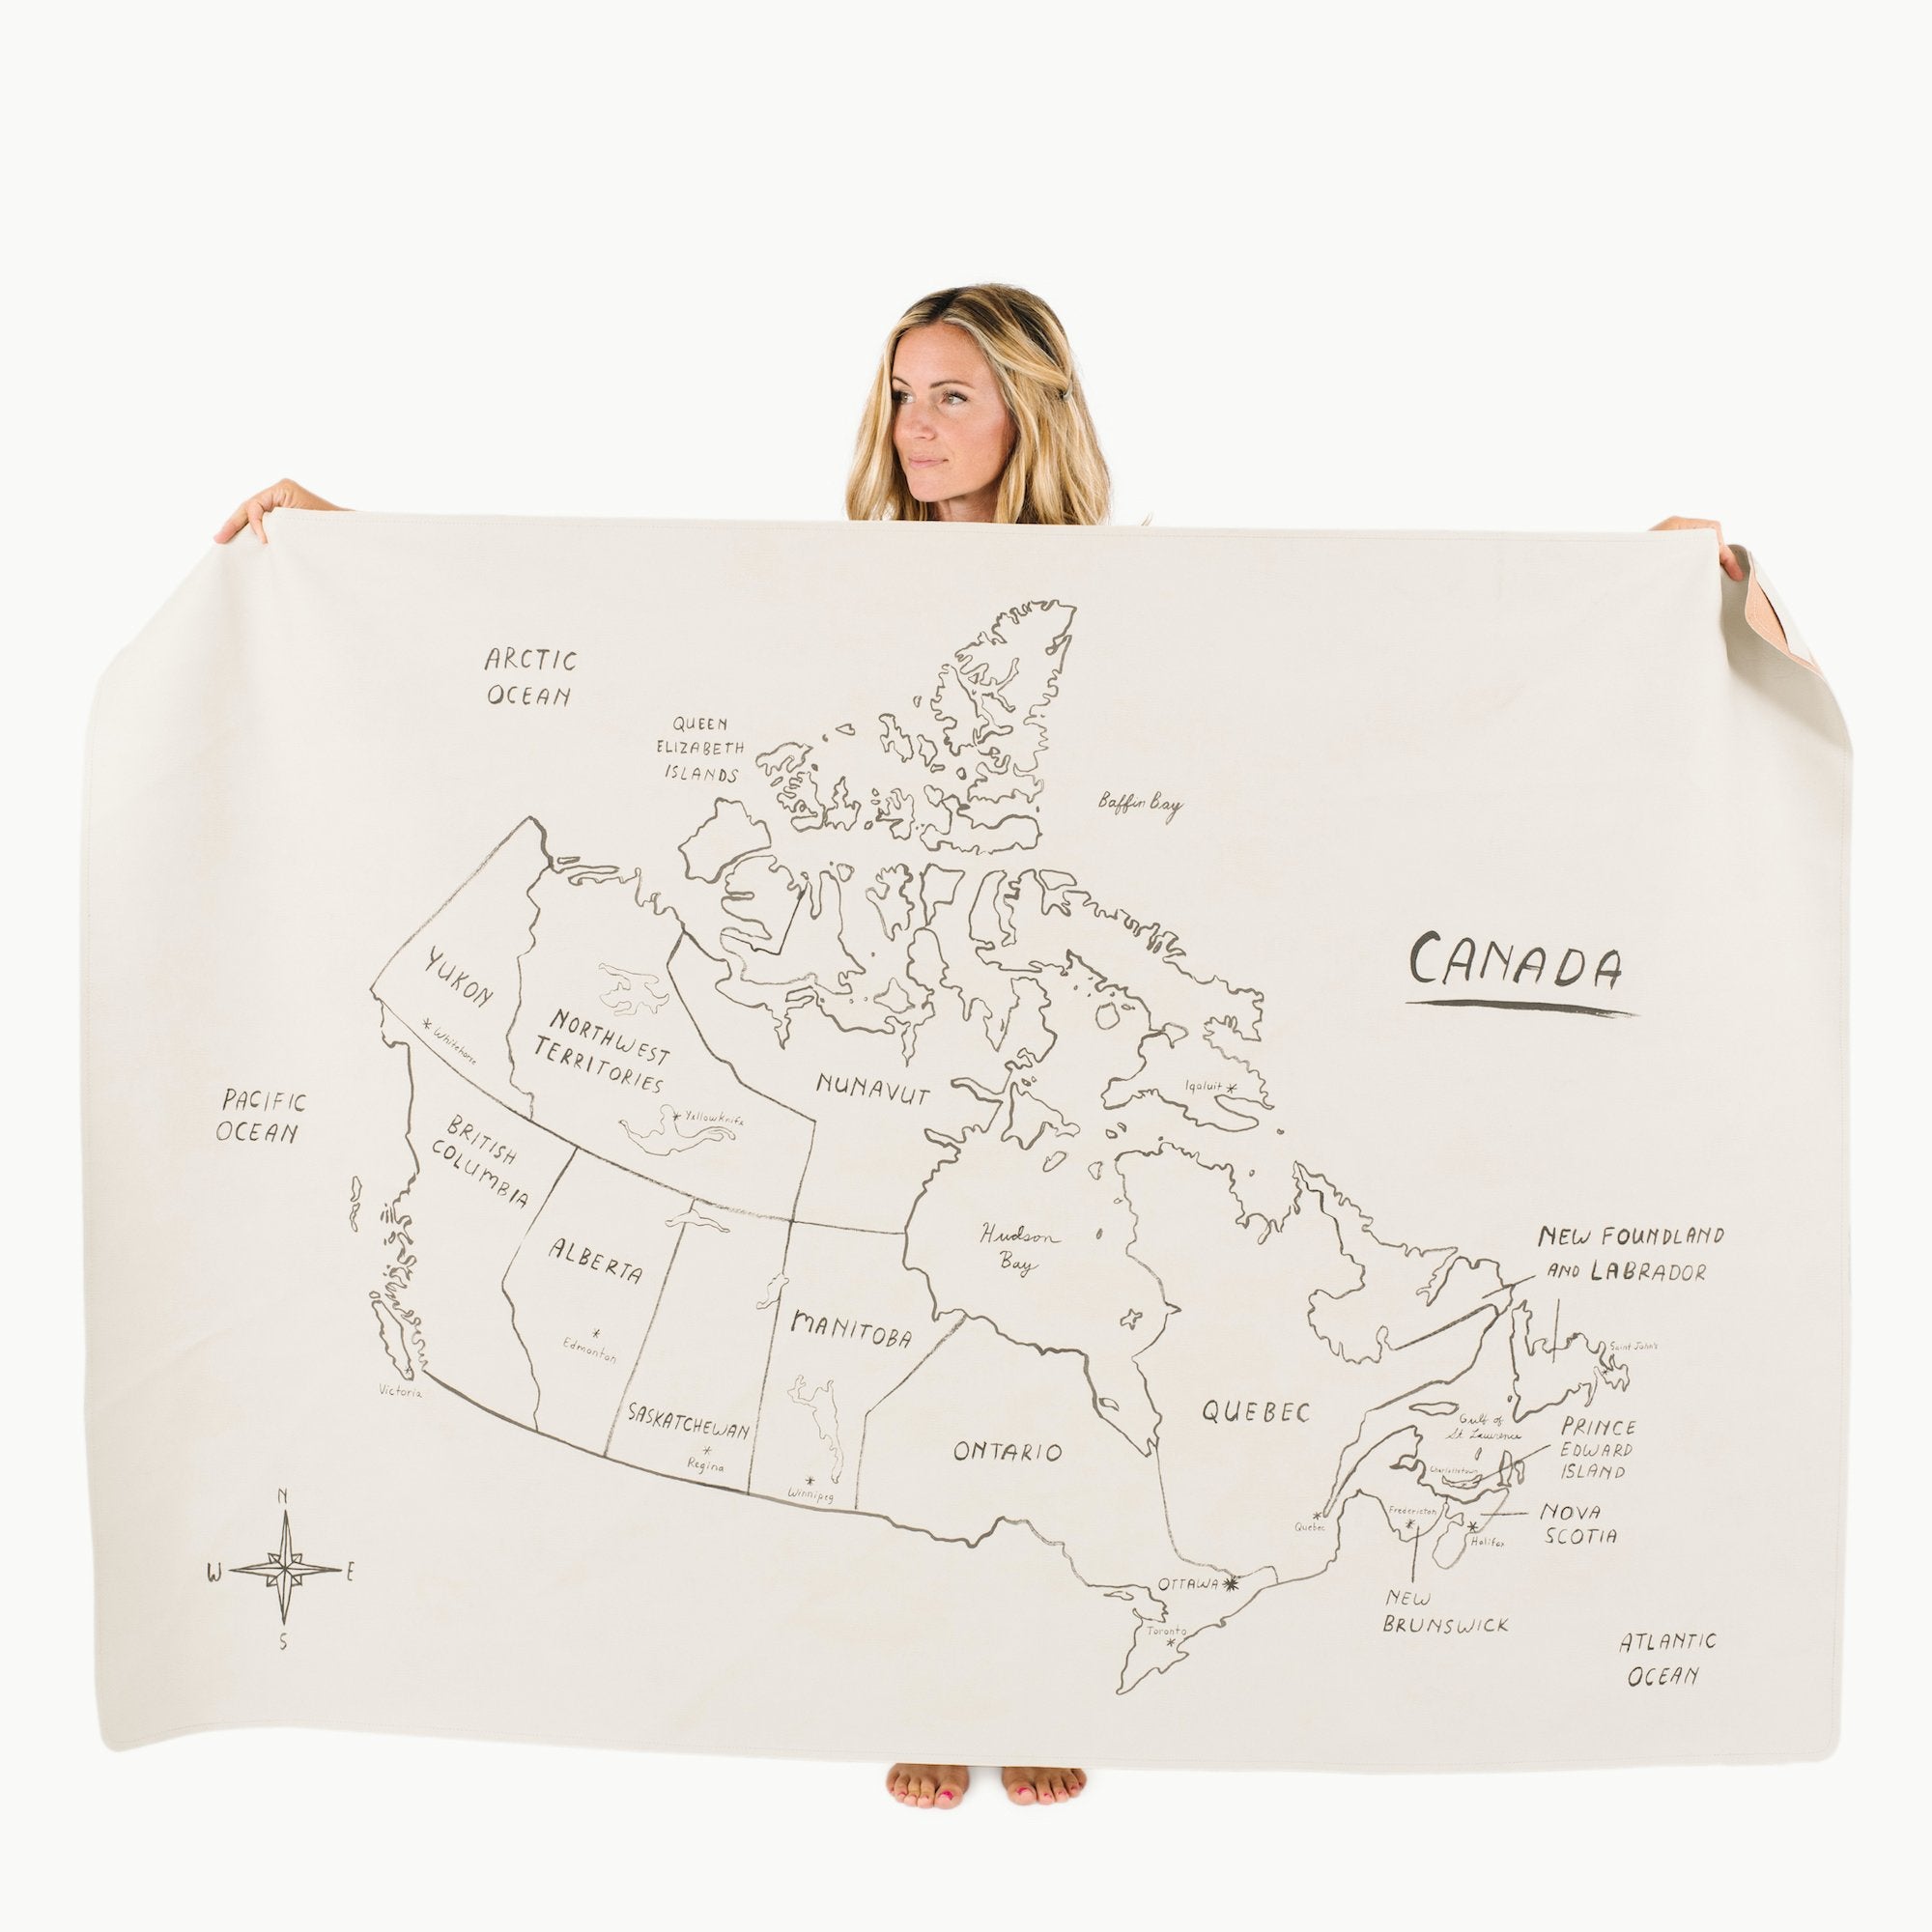 Canada Map (on sale)@Woman holding the Midi+ Canada Map